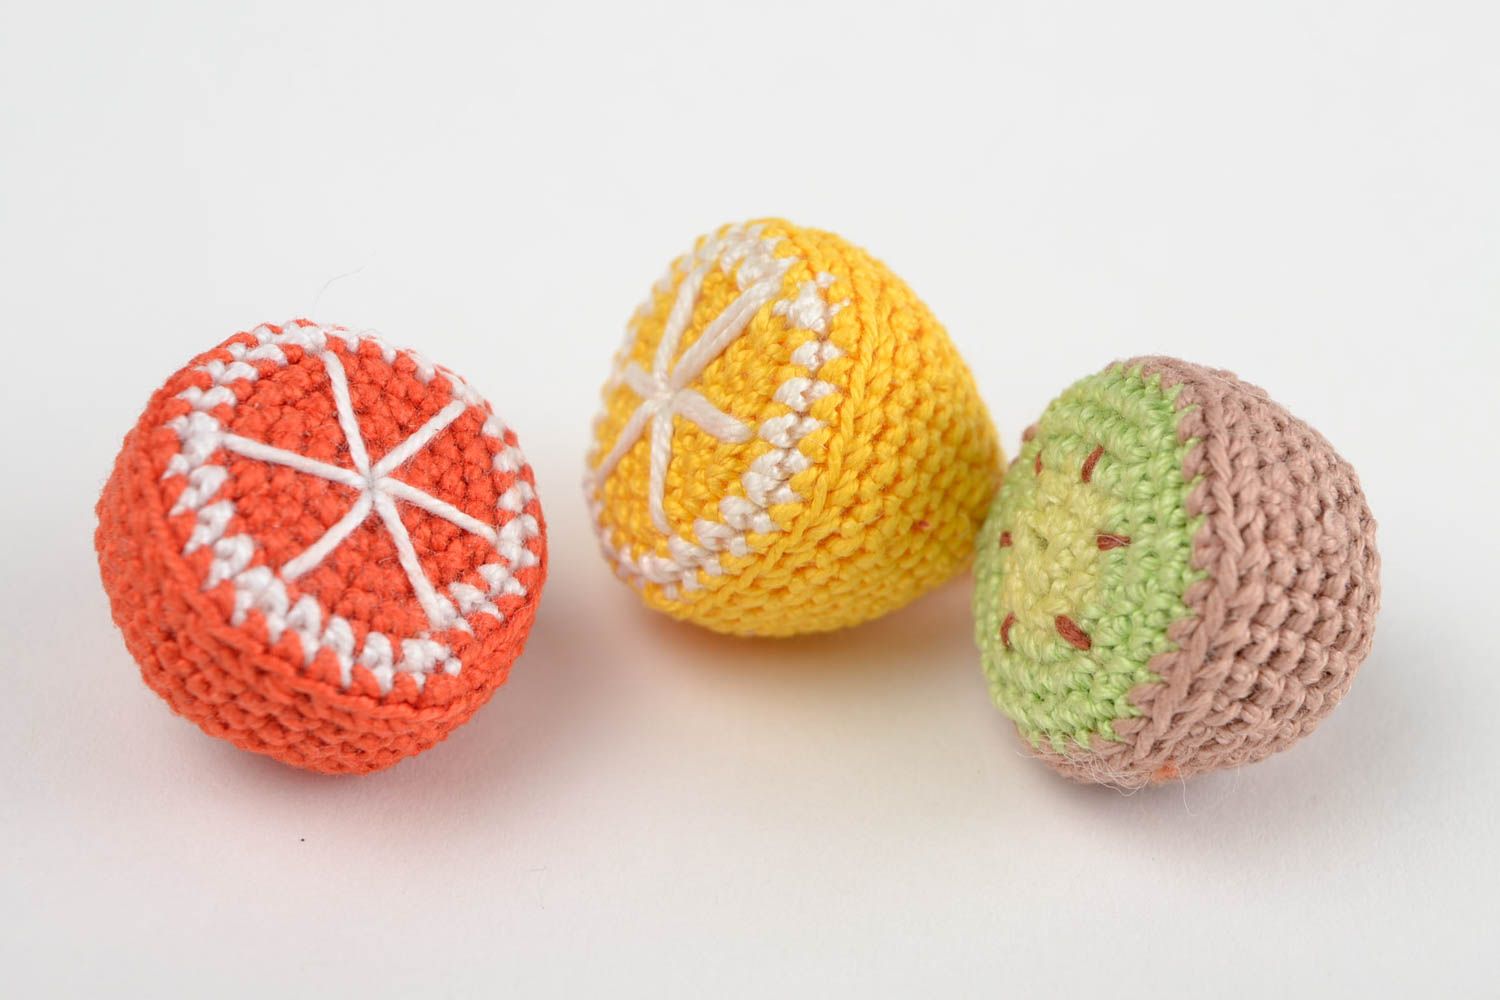 Handmade toy crocheted toy unusual toys for baby toy fruit gift ideas photo 3